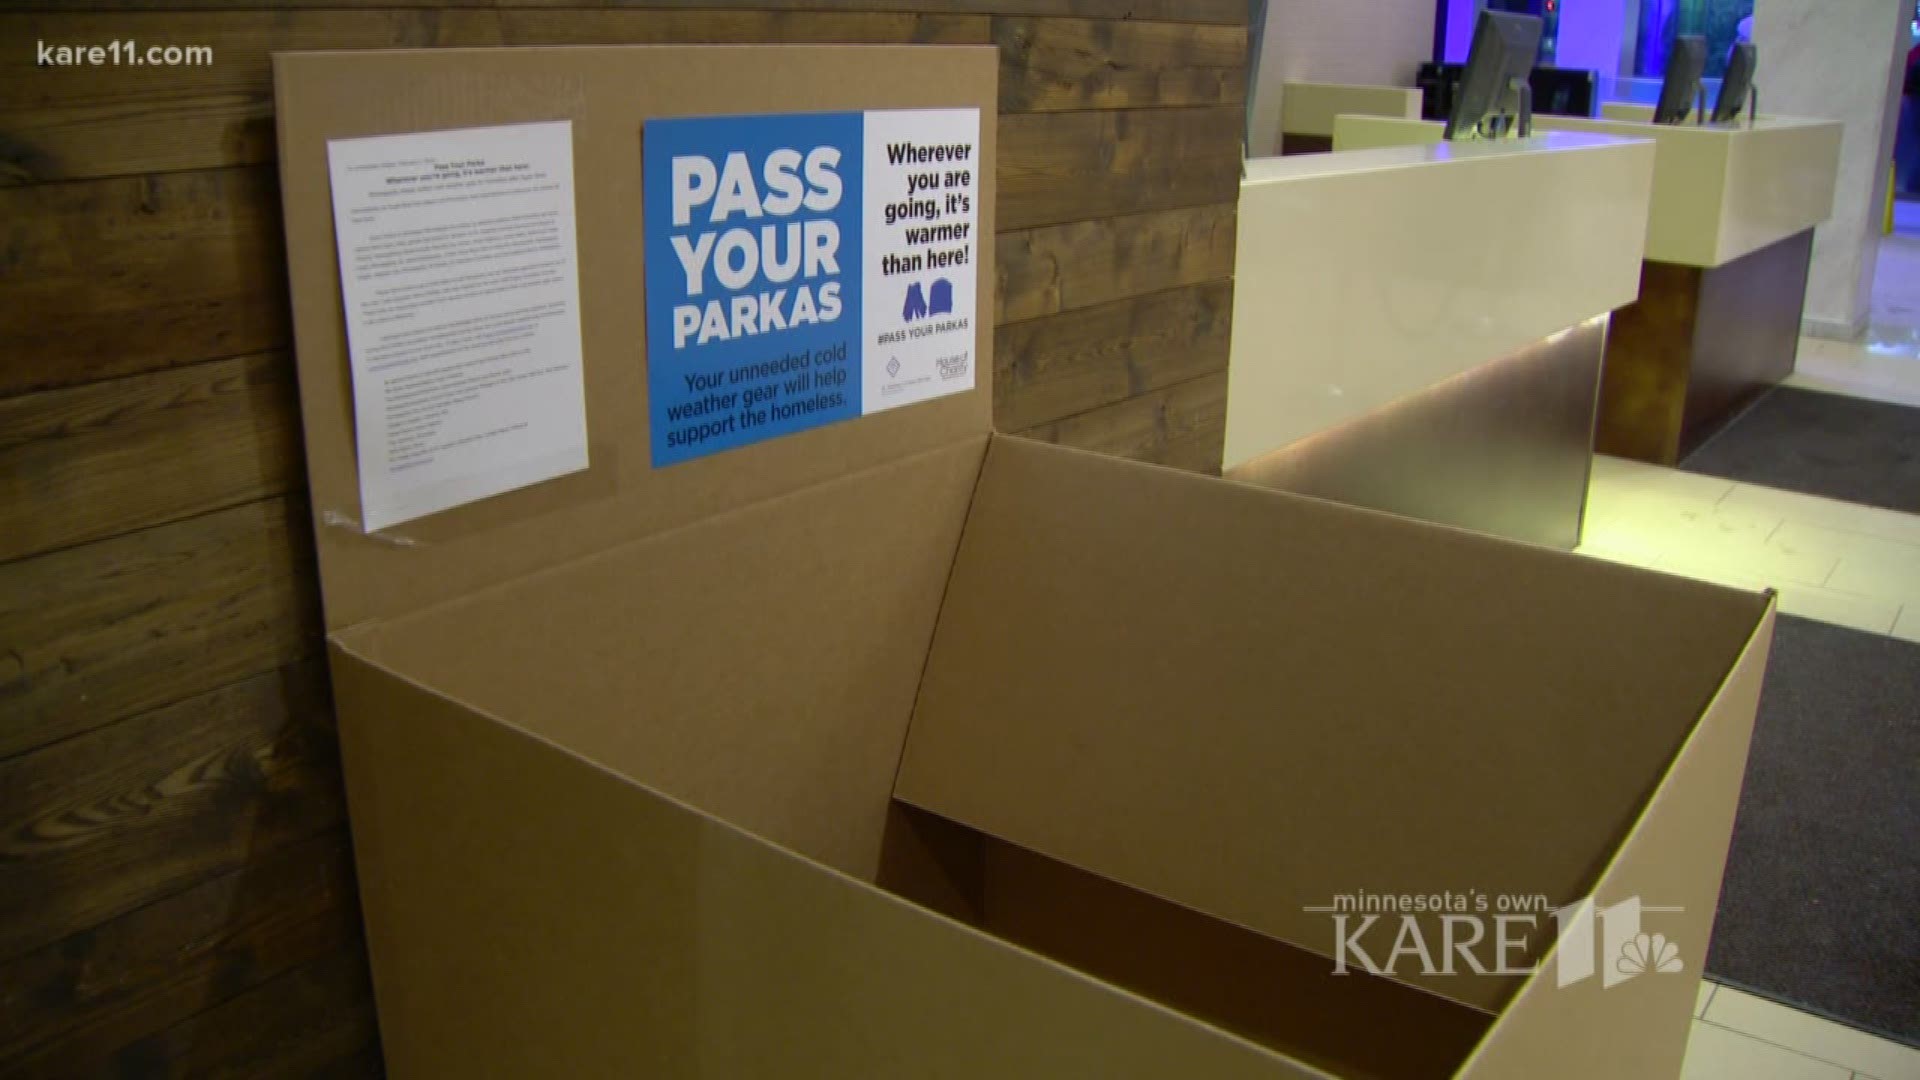 A movement has started in the Twin Cities to encourage visitors who bought cold weather gear that they will not need at home to leave it behind for Twin Cities folks in need. #Passyourparka